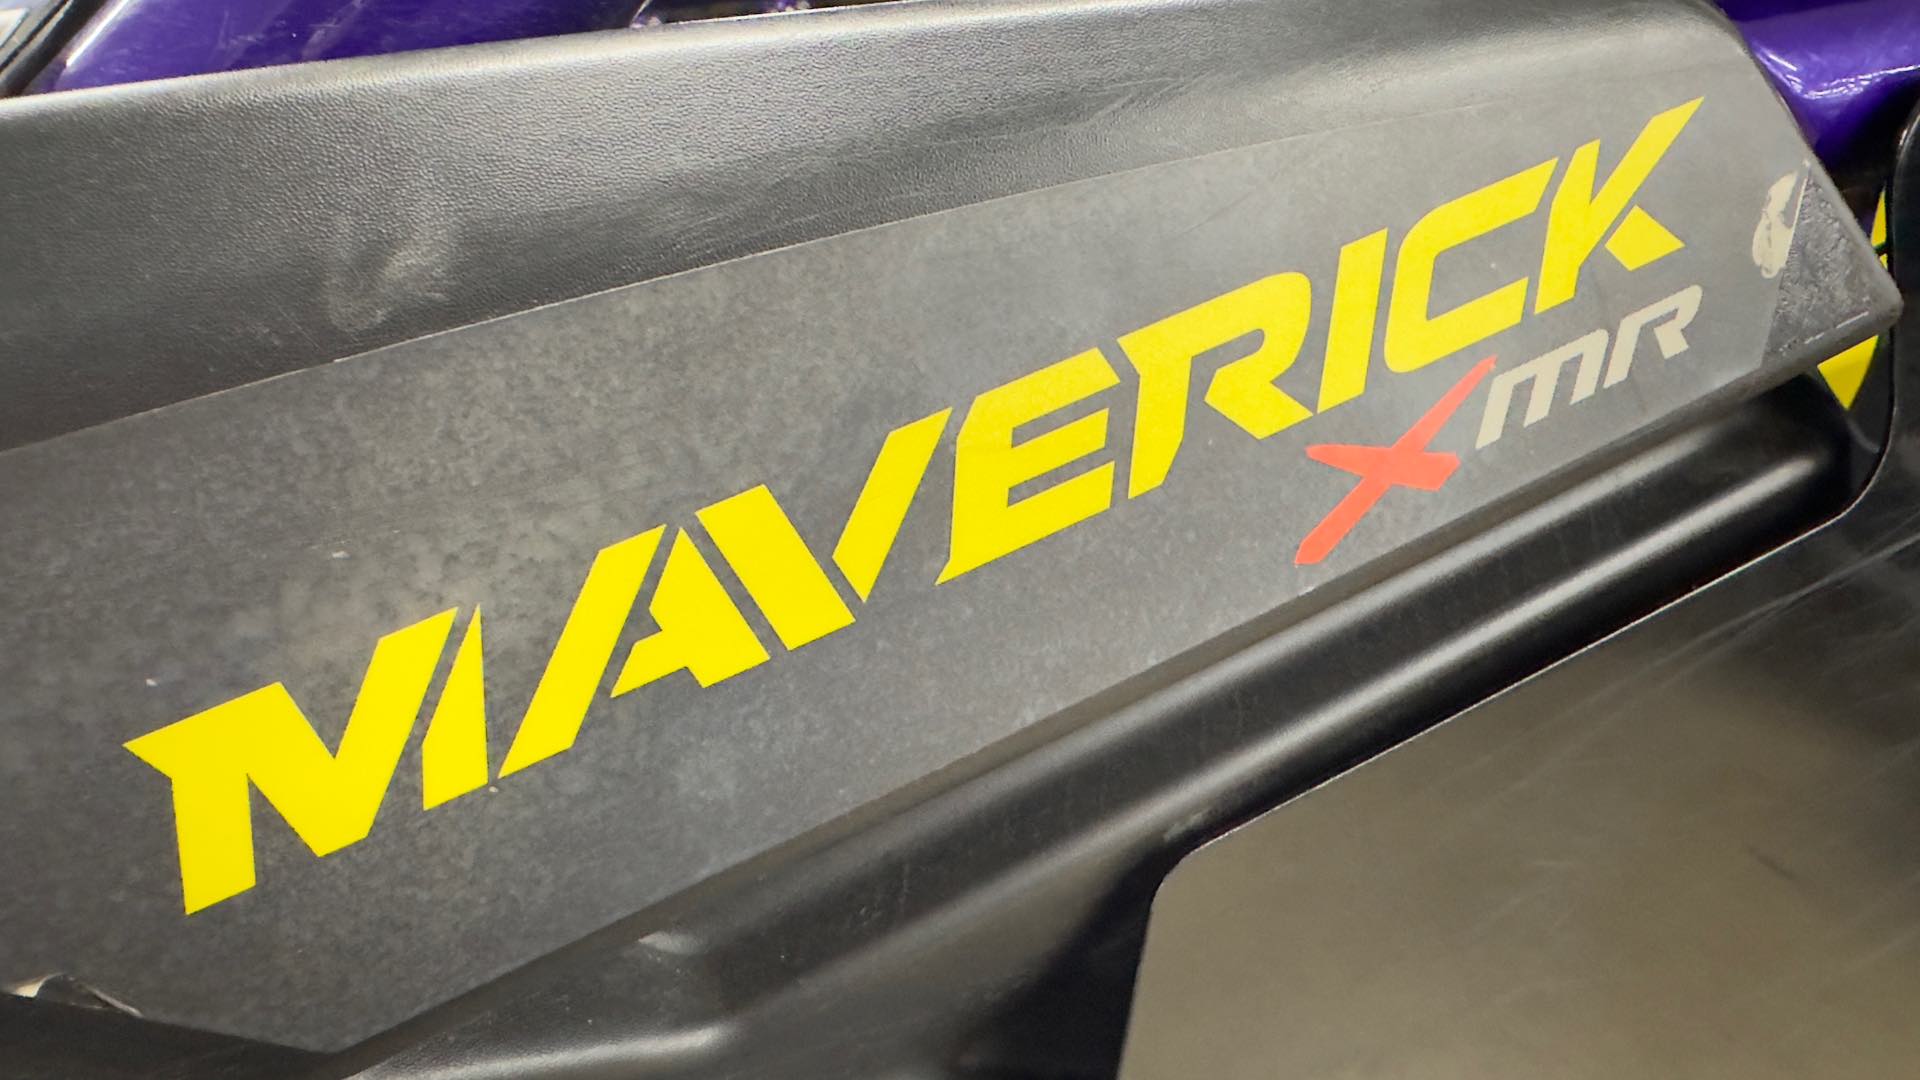 2019 Can-Am Maverick X3 X mr TURBO R at ATVs and More